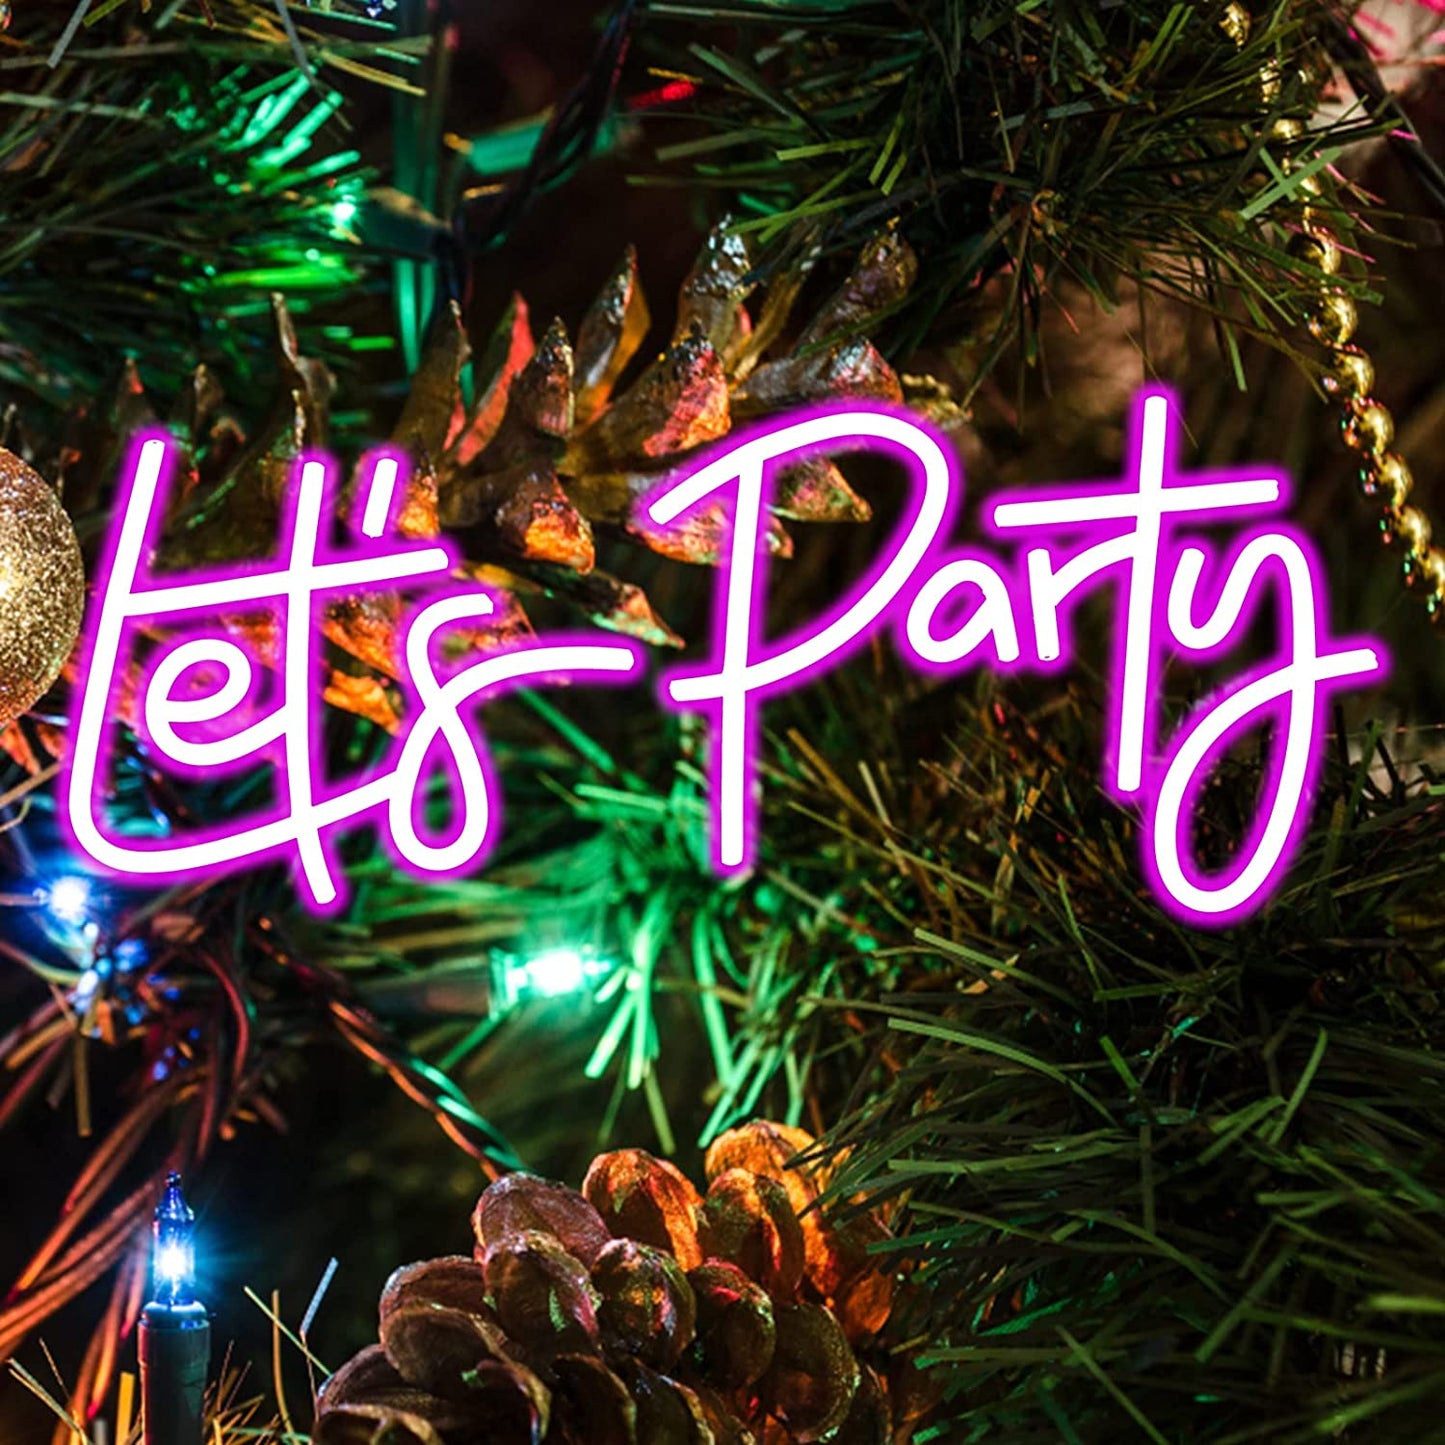 Let's Party Neon Sign, 23"X10" Neon Sign for Wall Décor